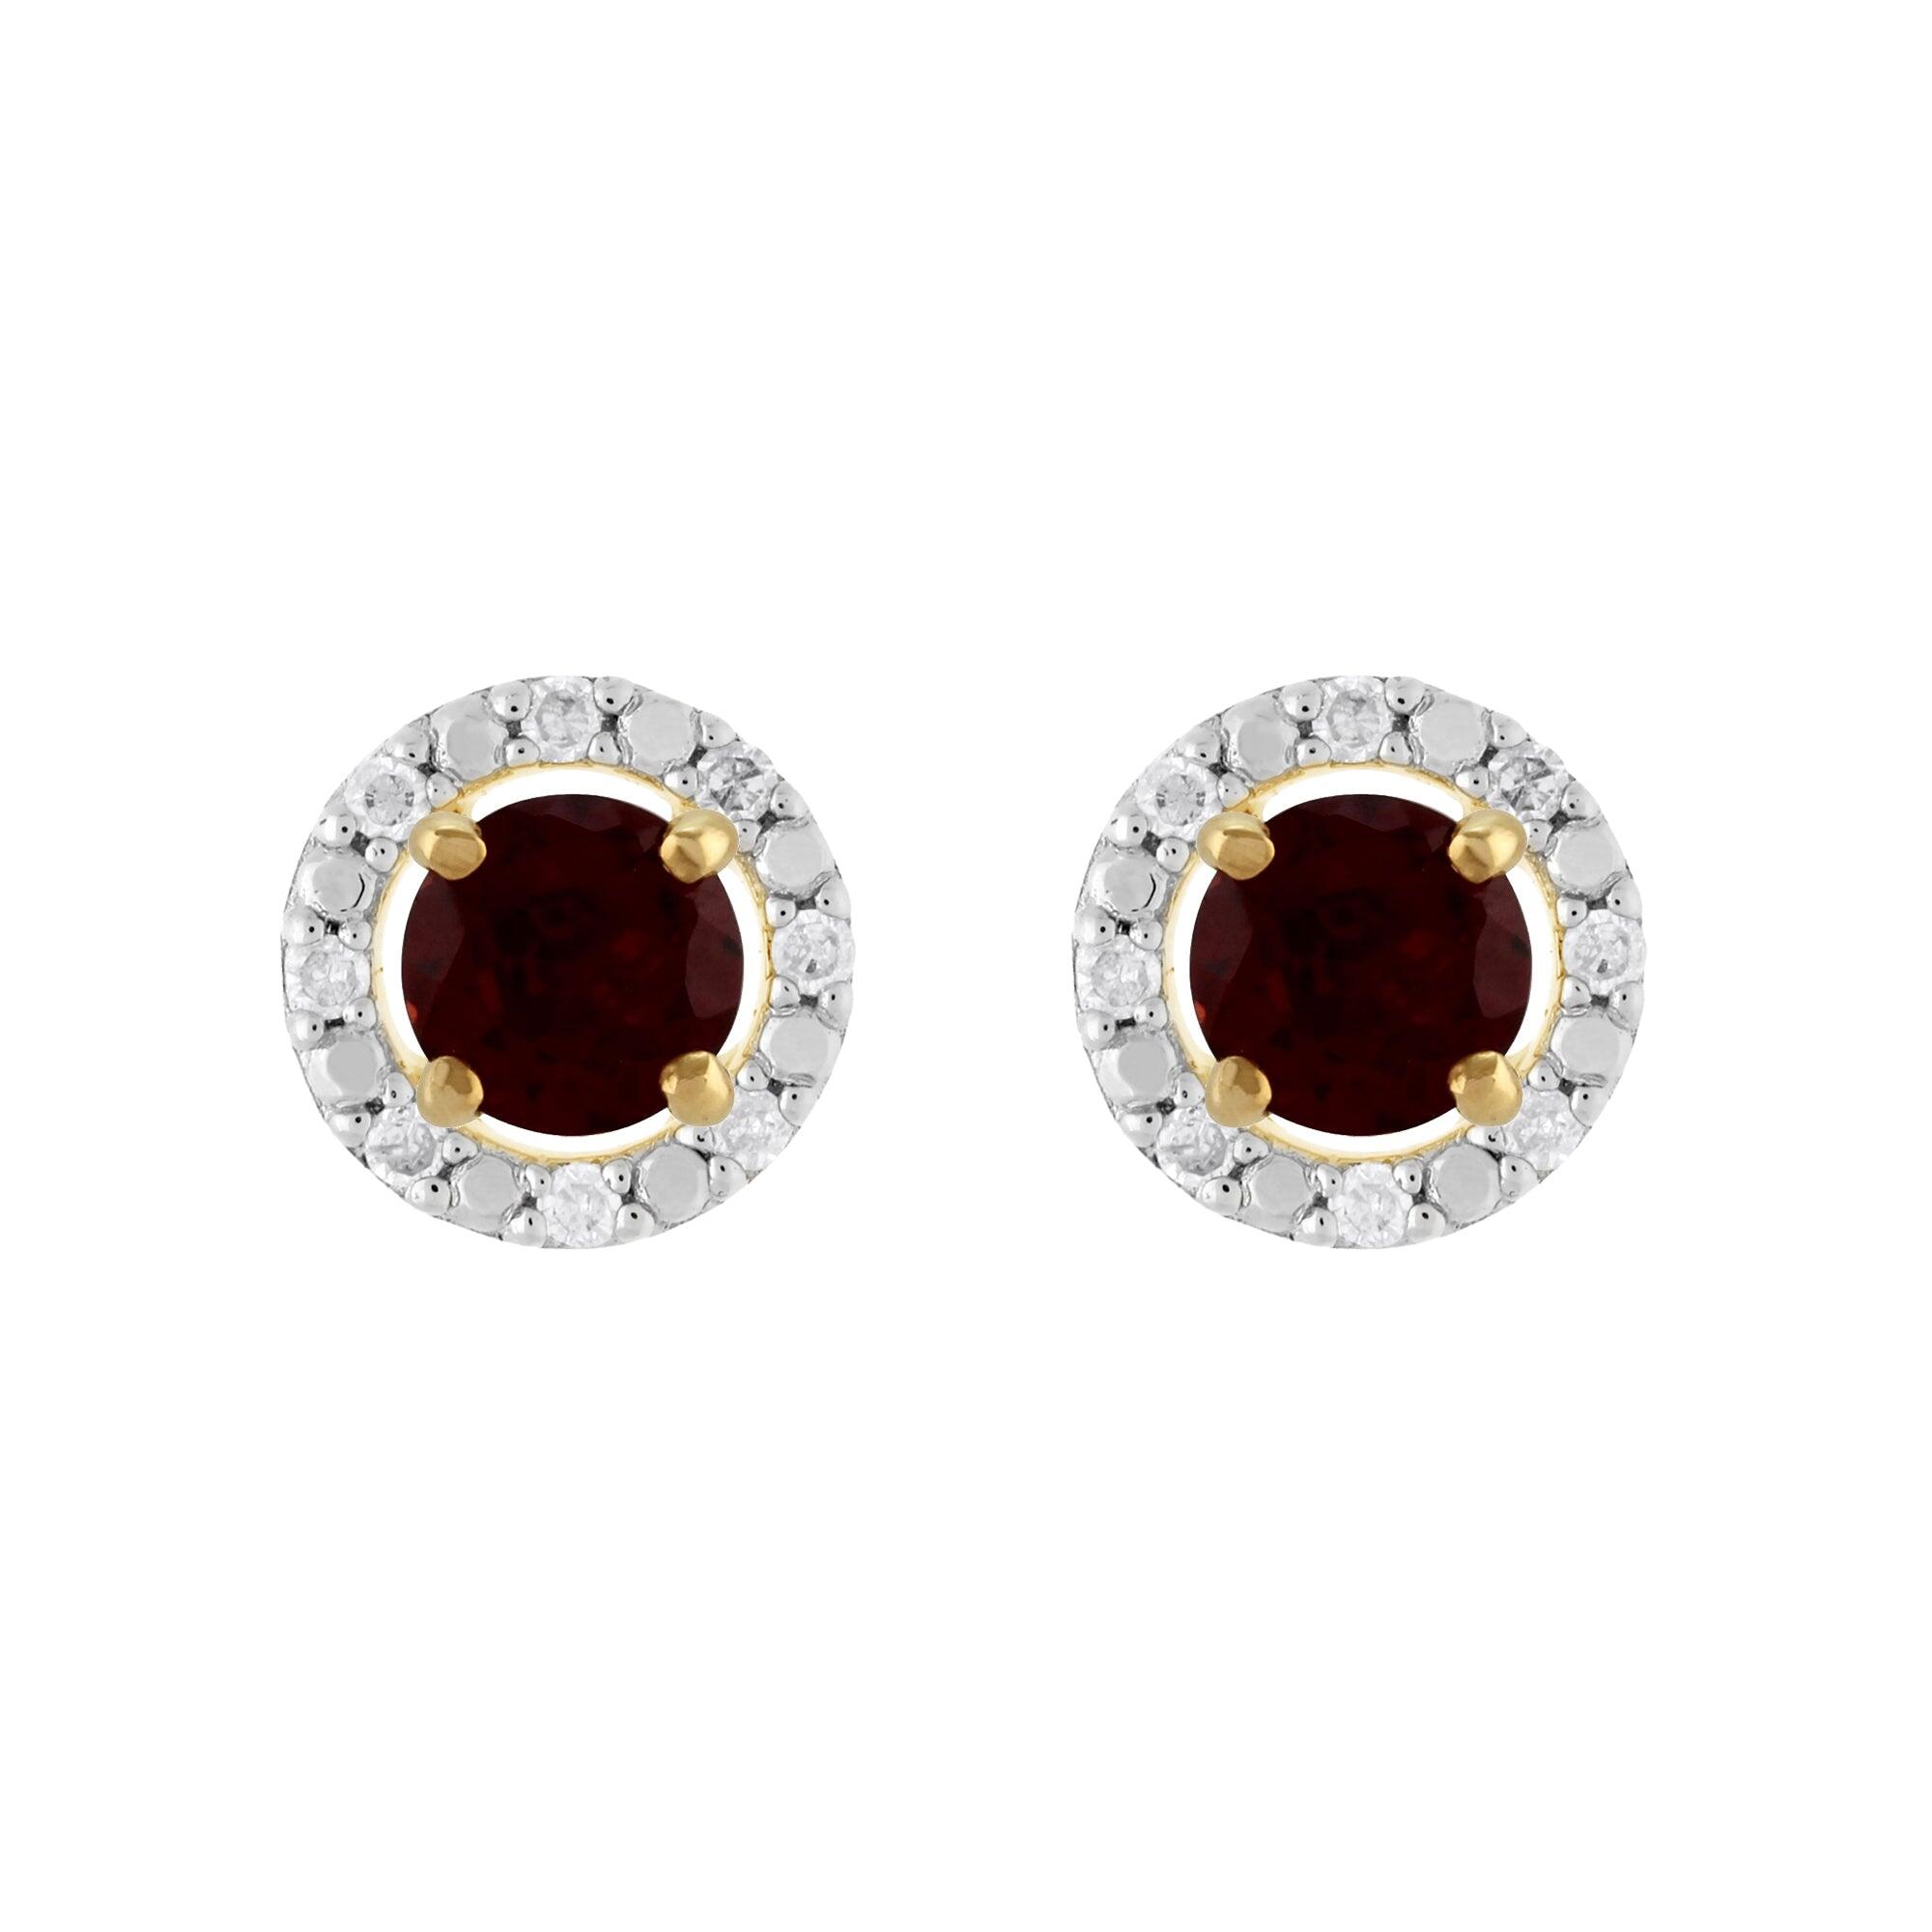 Classic Round Garnet Stud Earrings with Detachable Diamond Round Earrings Jacket Set in 9ct Yellow Gold